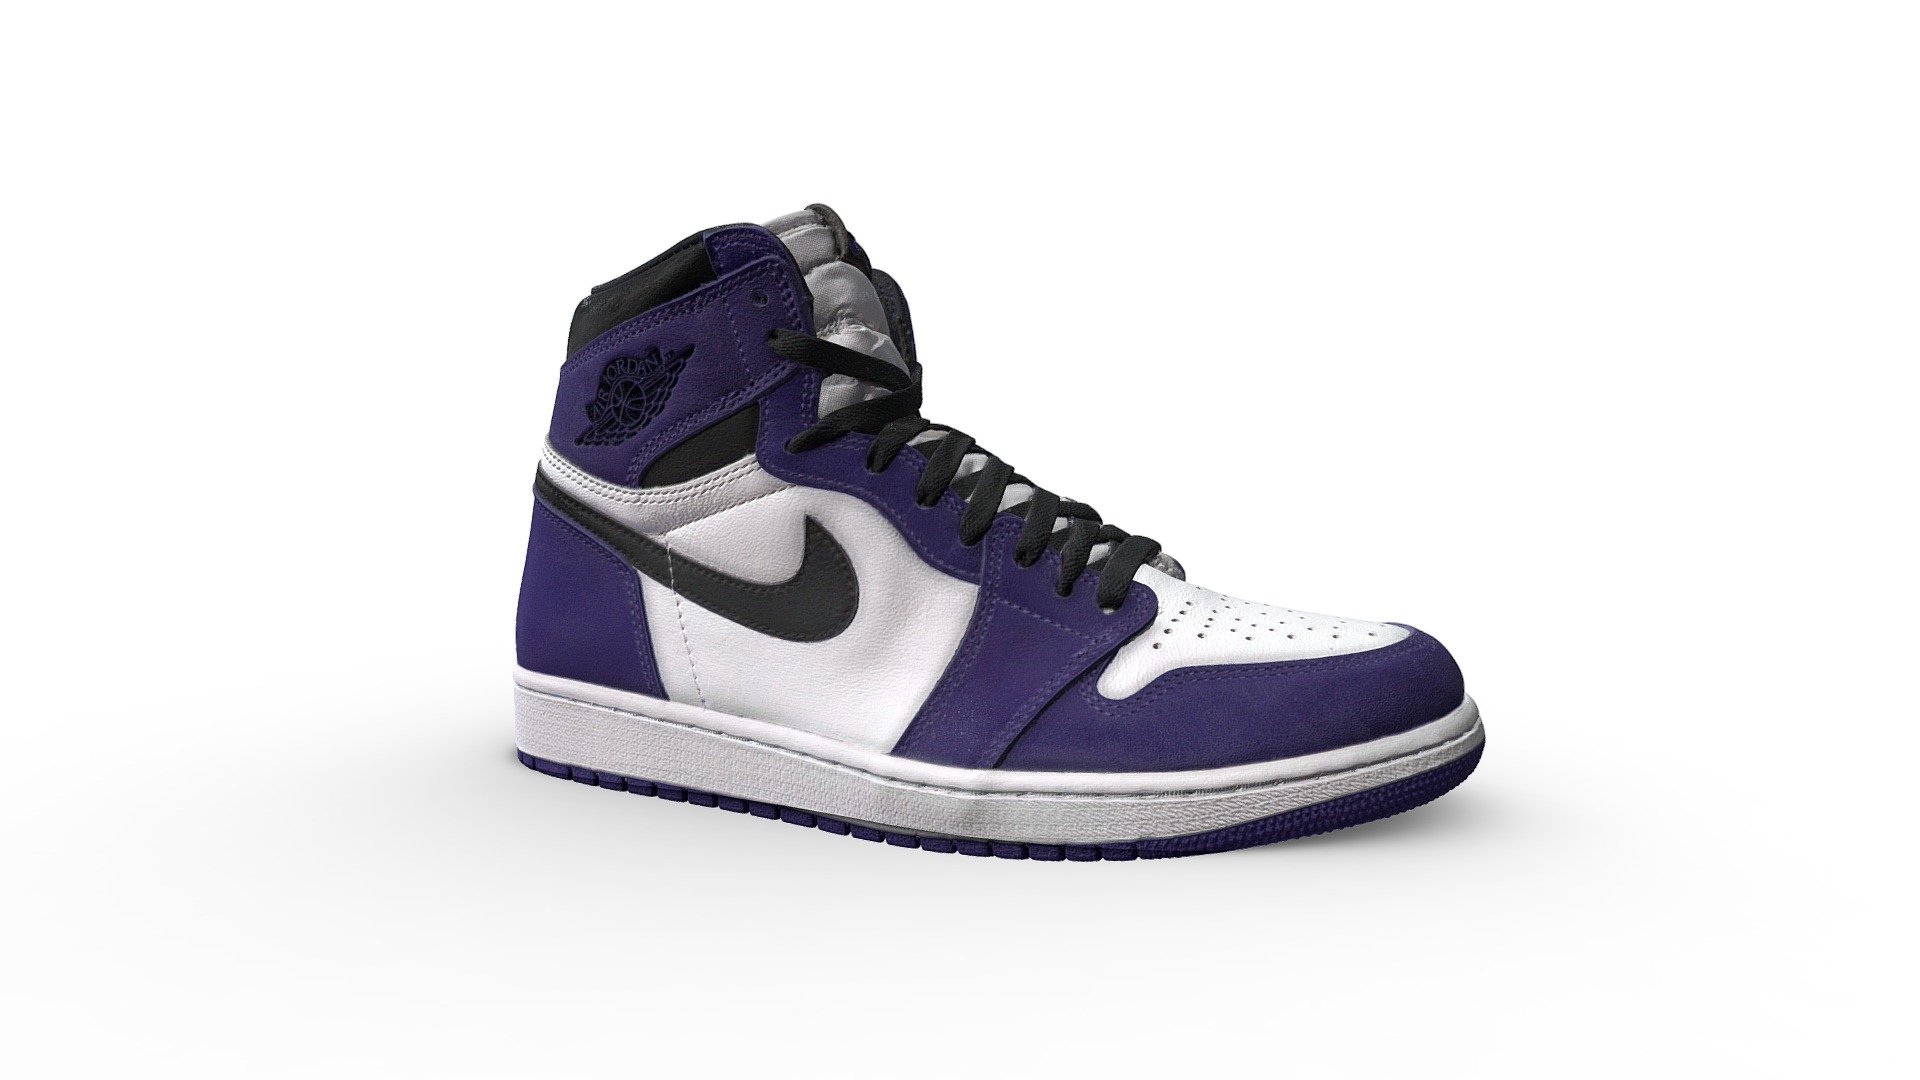 Nike Air Jordan 1 Retro High Court Purple White scanned.

Jordan Brand added a new colorway to the silhouette that started it all with the Jordan 1 Retro High Court Purple White. This release follows similar design elements as the Chicago 1, only this time replacing red with Court Purple.

This Jordan 1 consists of a white leather upper with Court Purple overlays and black detailing. A black Swoosh and Wings logo, white midsole, and Court Purple outsole completes the design. These sneakers released in April of 2020 and retailed for $170 3d model